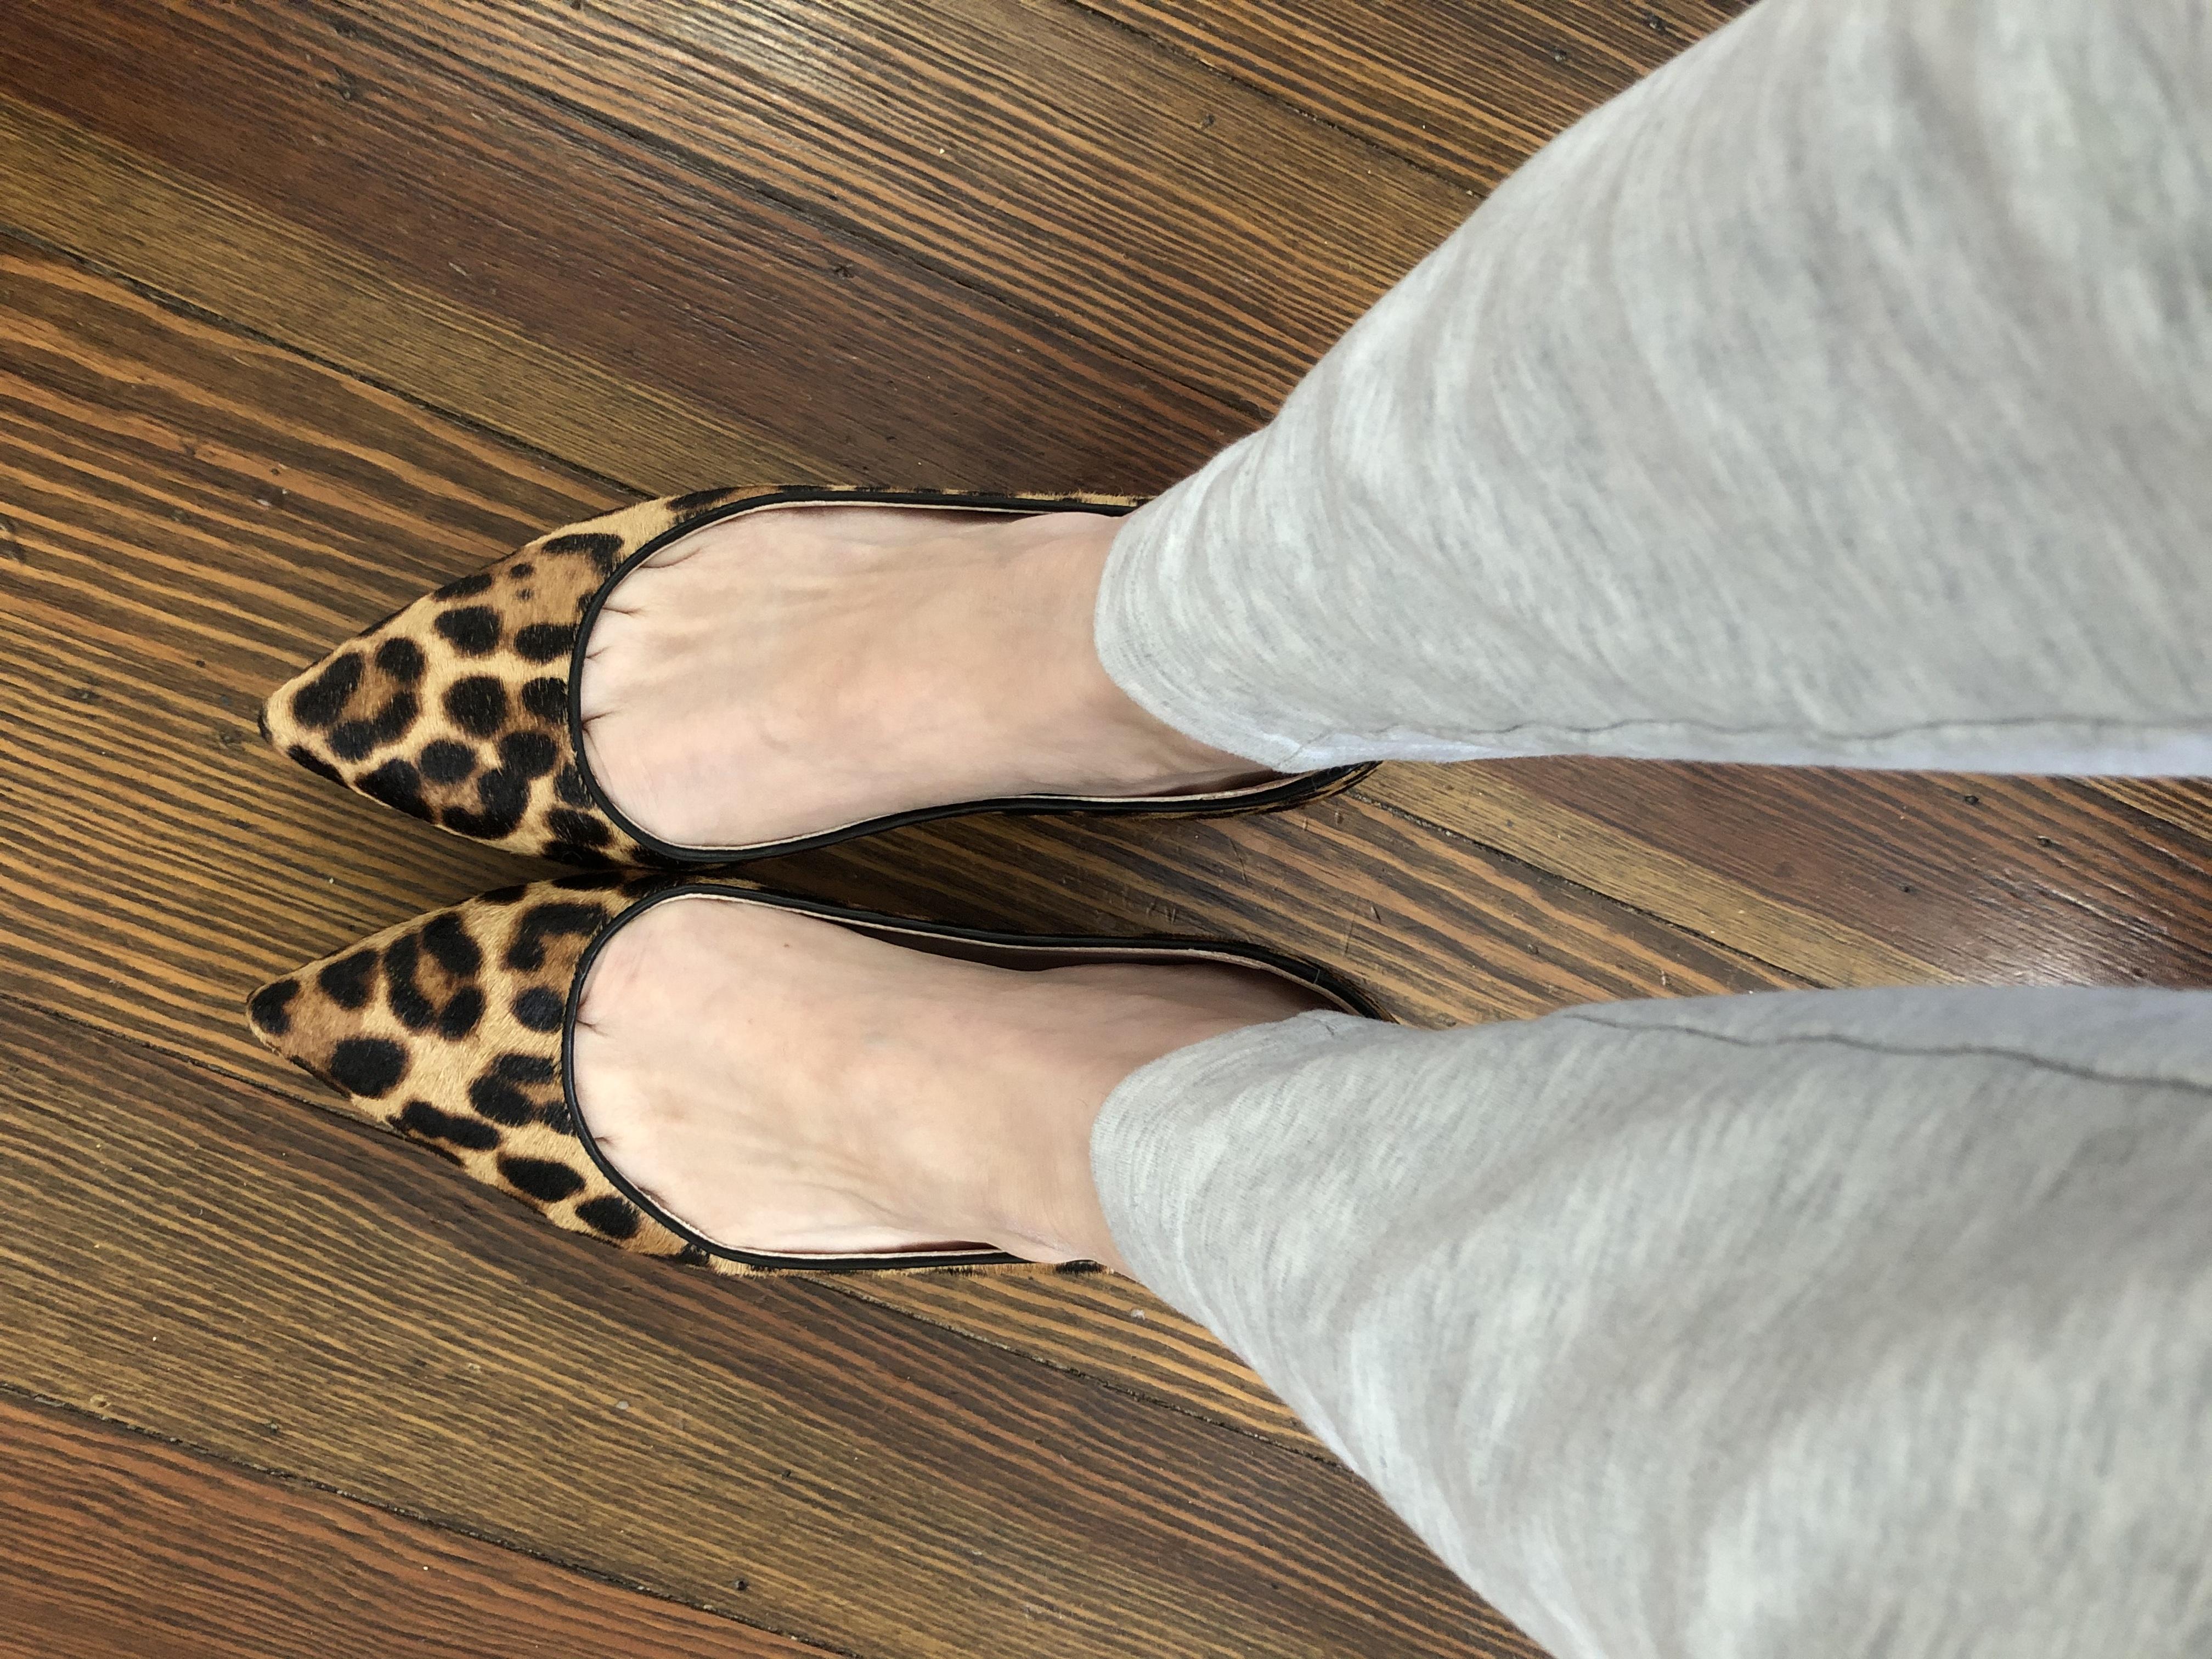 J.Crew: Pointed-toe Flats In Leopard Calf Hair For Women